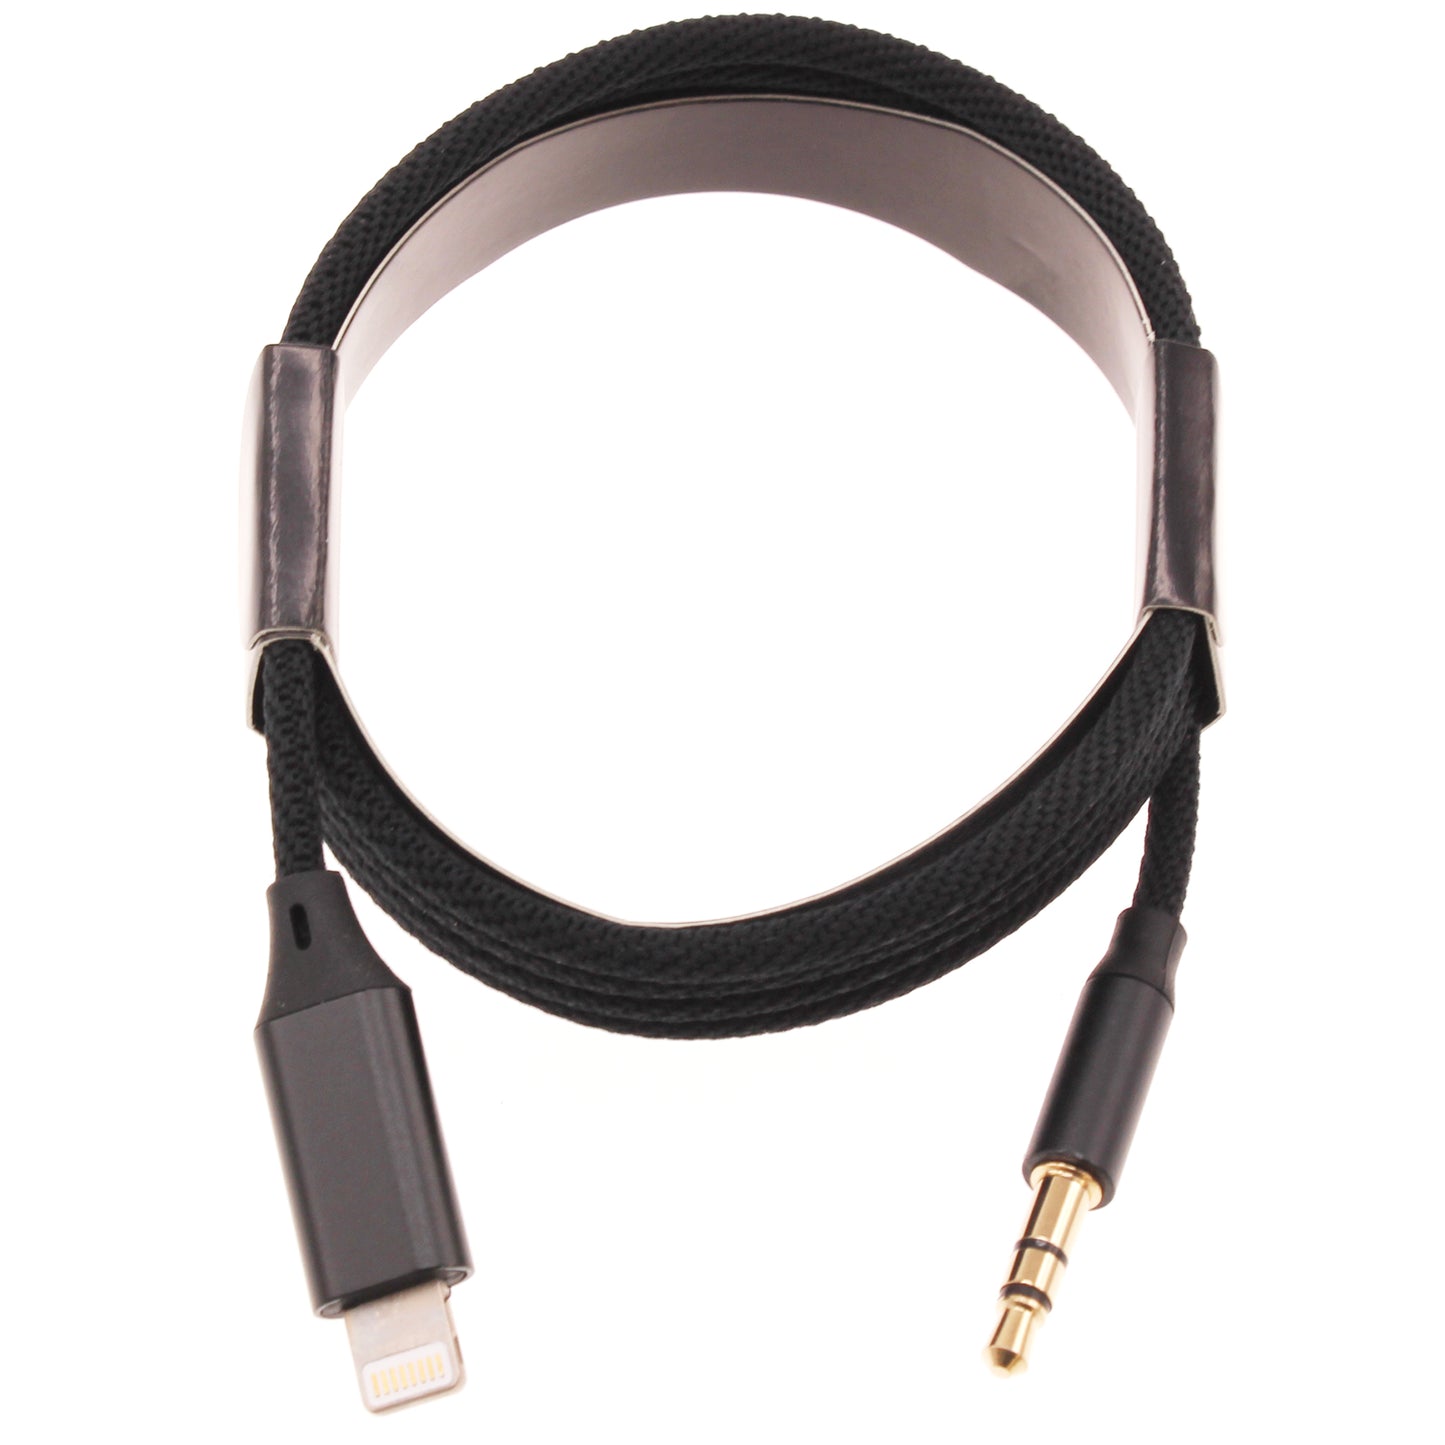 Aux Cable, Headphone Jack Adapter Speaker Wire Car Stereo Aux-in Audio Cord MFI Lightning to 3.5mm - NWA73